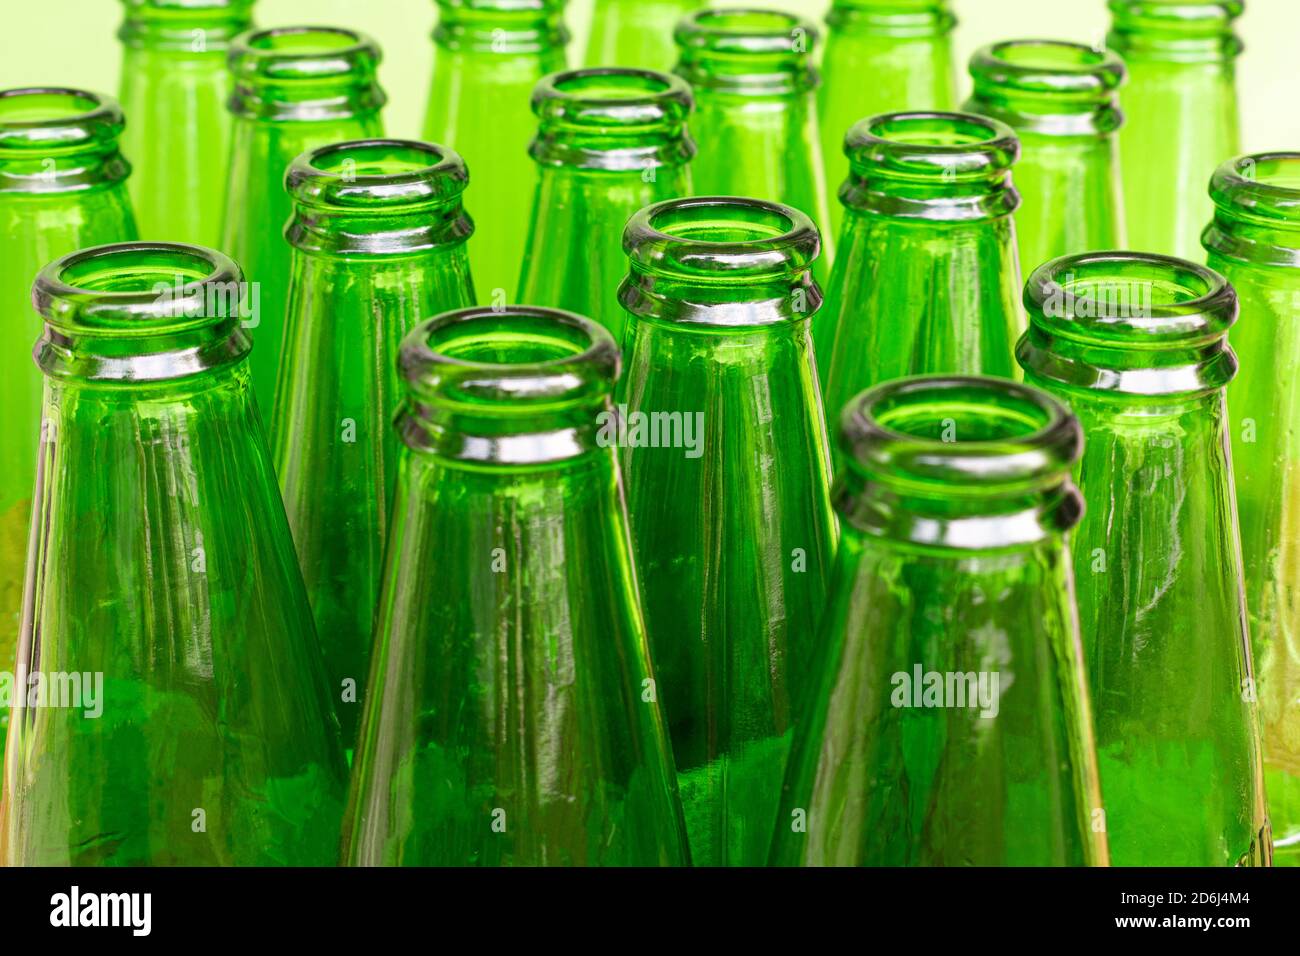 background with empty green glass bottles Stock Photo - Alamy